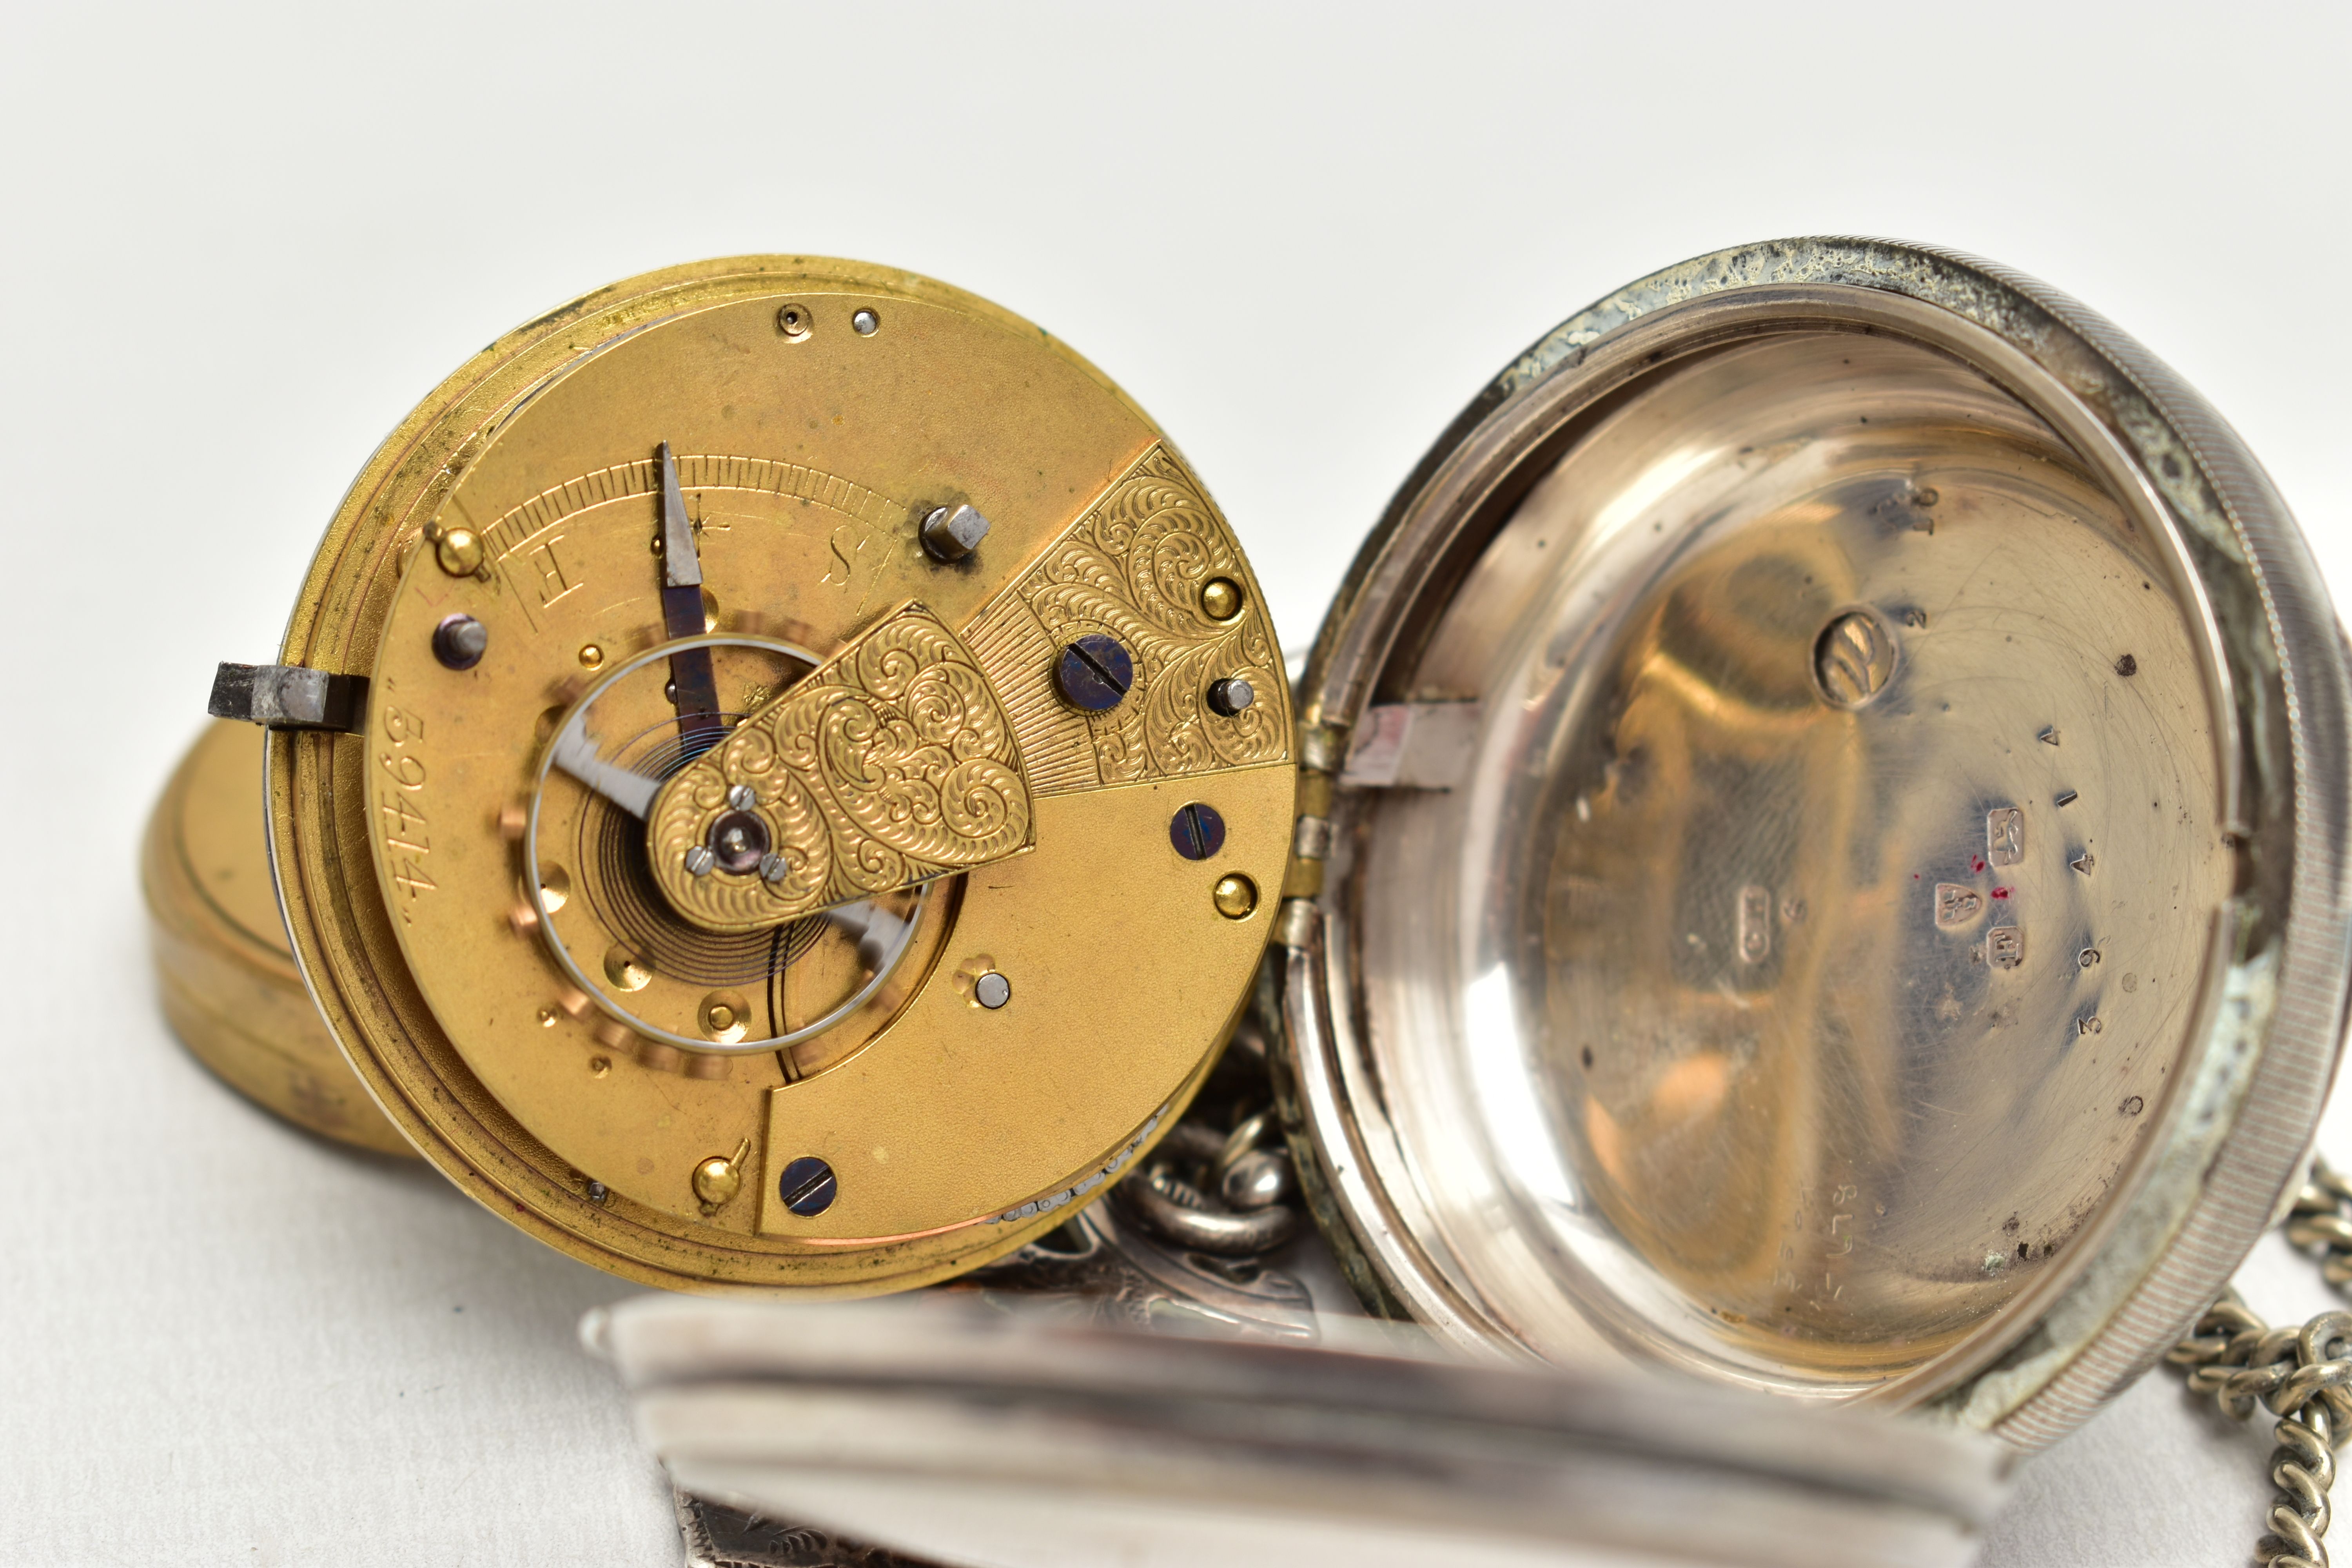 A SILVER OPEN FACE POCKET WATCH WITH ALBERT CHAIN AND FOB, key wound pocket watch featuring a - Image 5 of 5